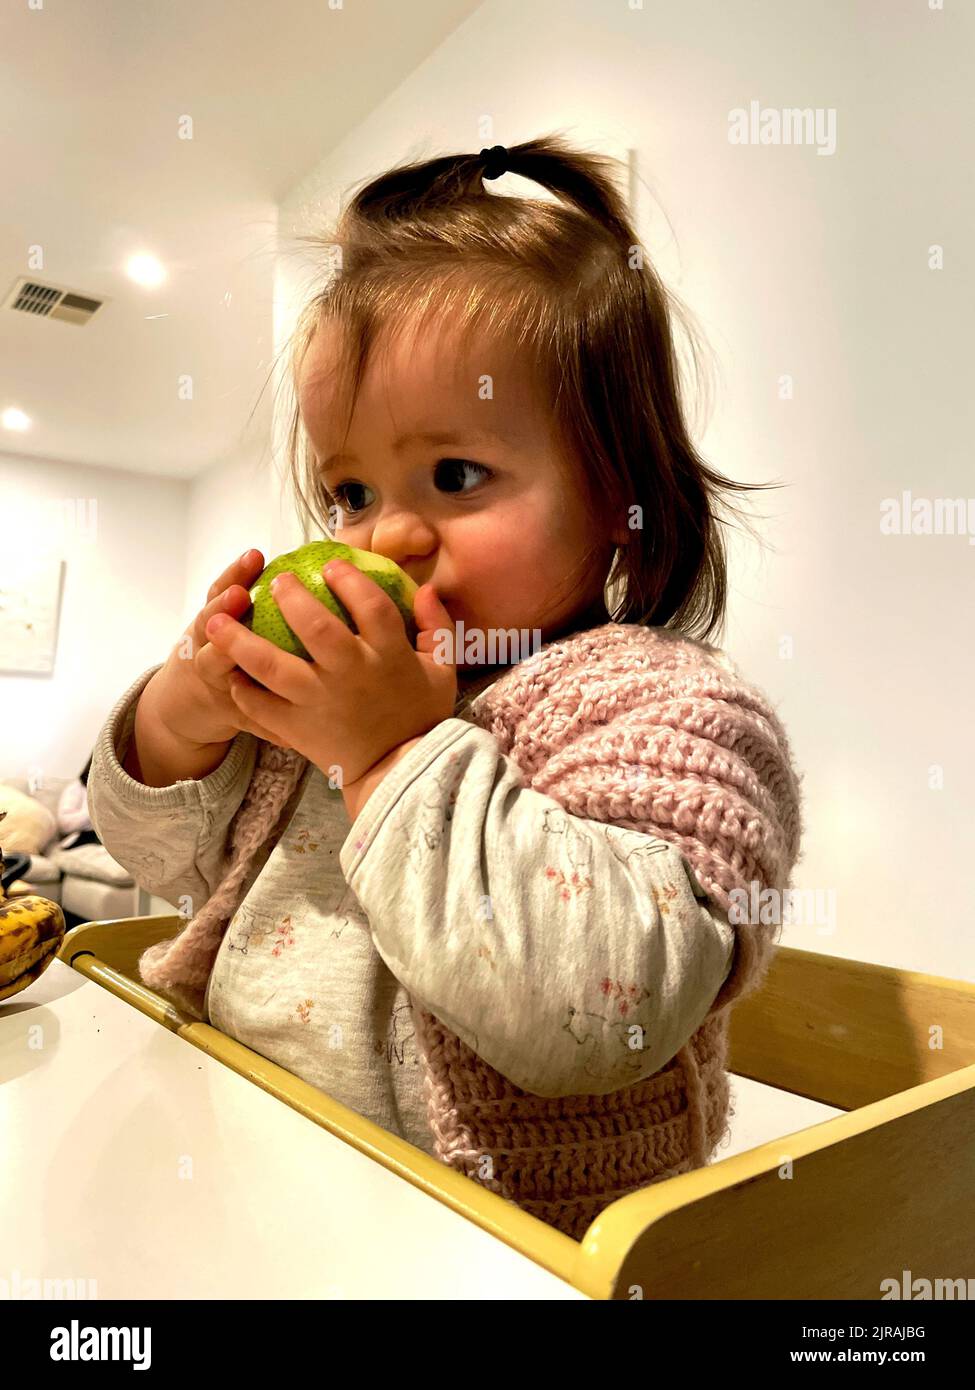 A small Caucasian girl eating a pear standing up next to a bench Stock Photo